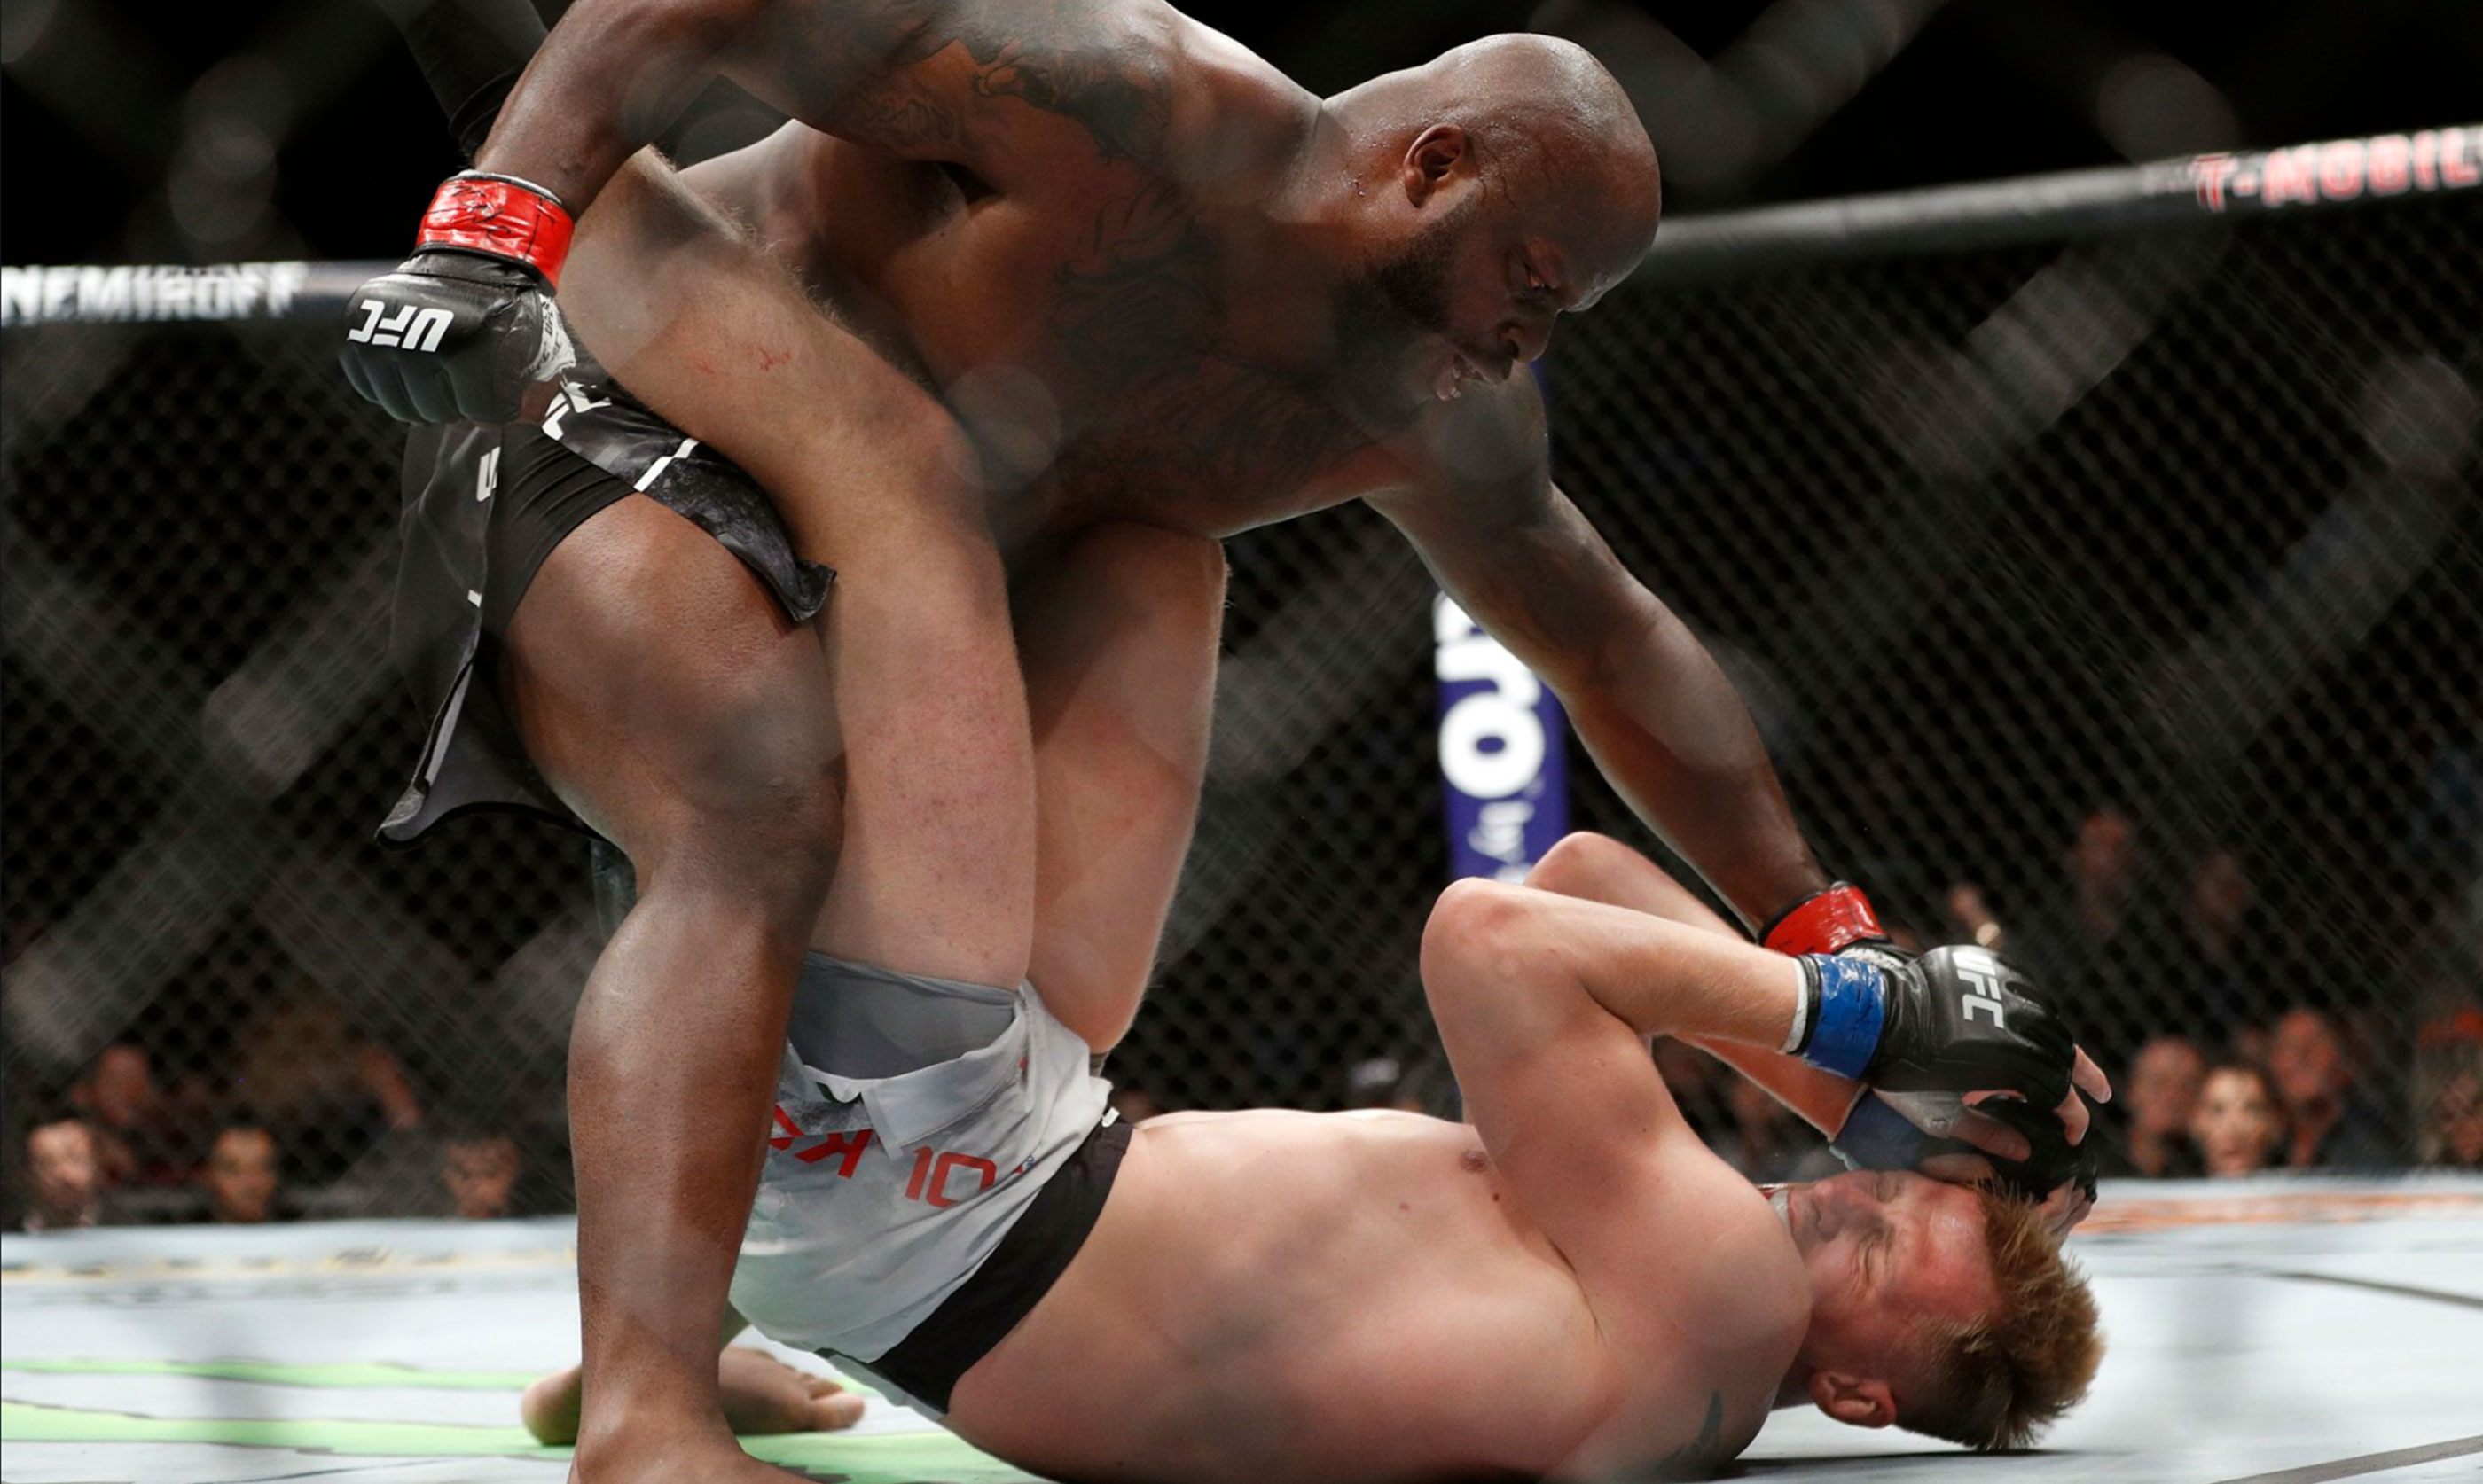 UFC Fighter Derrick Lewis Gives Best Interview Sports History After Amazing KO: 